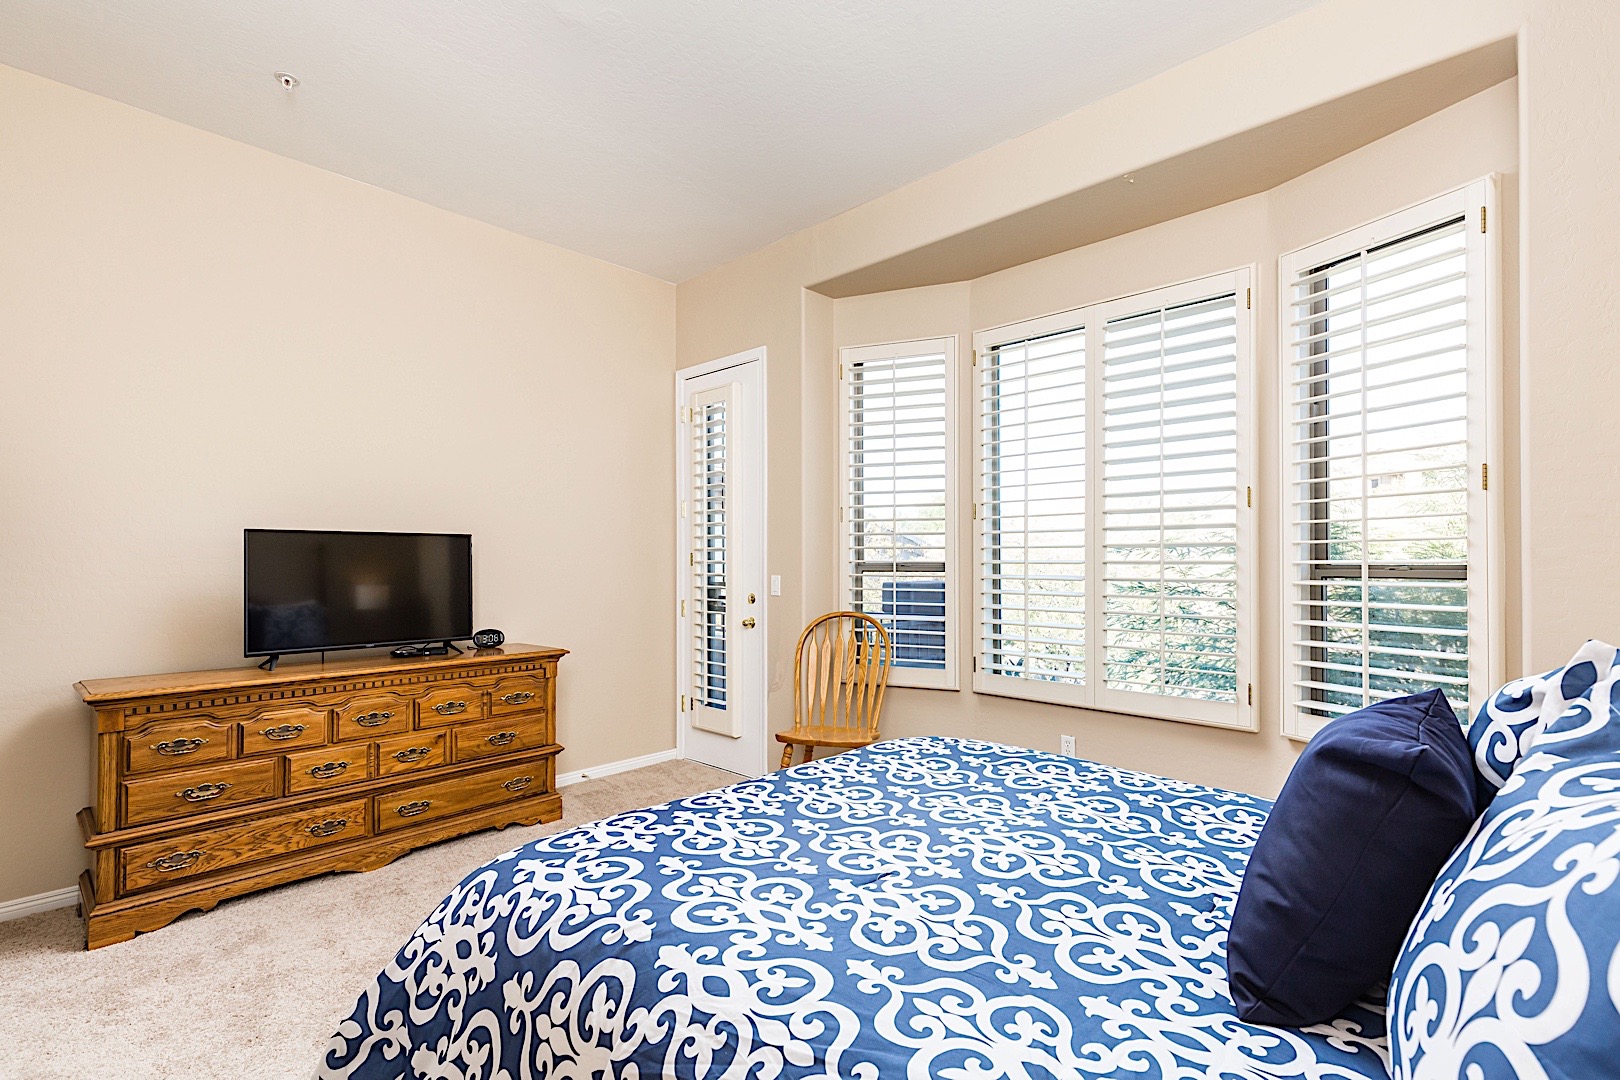 Master bedroom- Flat screen TV with cable and access to upper level patio with a KING bed.